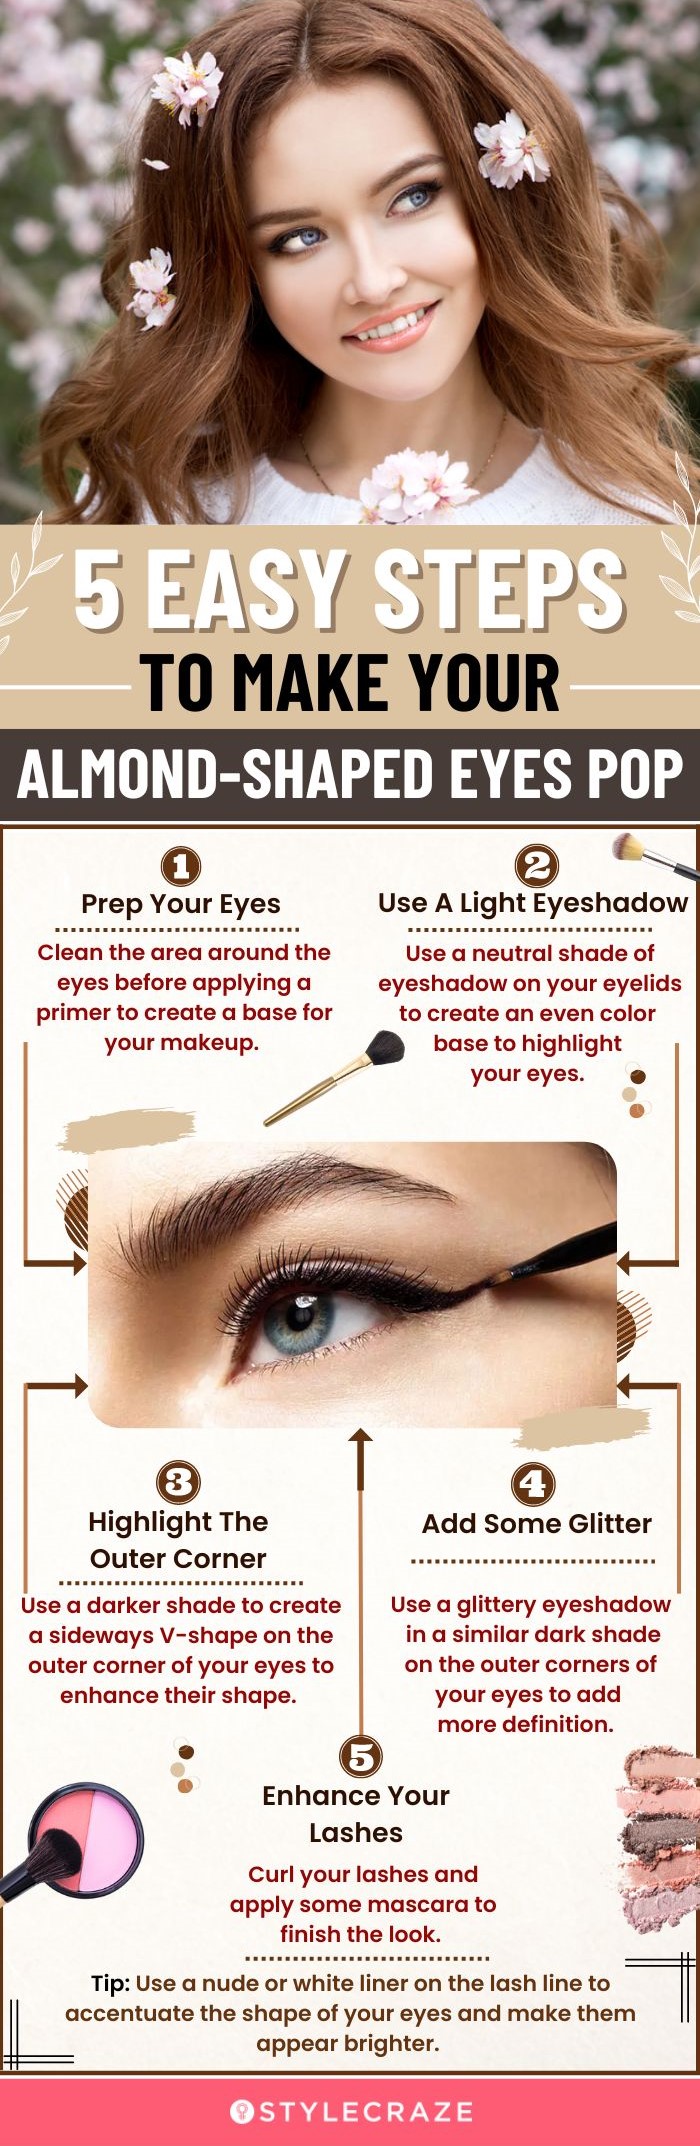 5 Easy Steps To Make Your Almond-Shaped Eyes Pop (infographic)